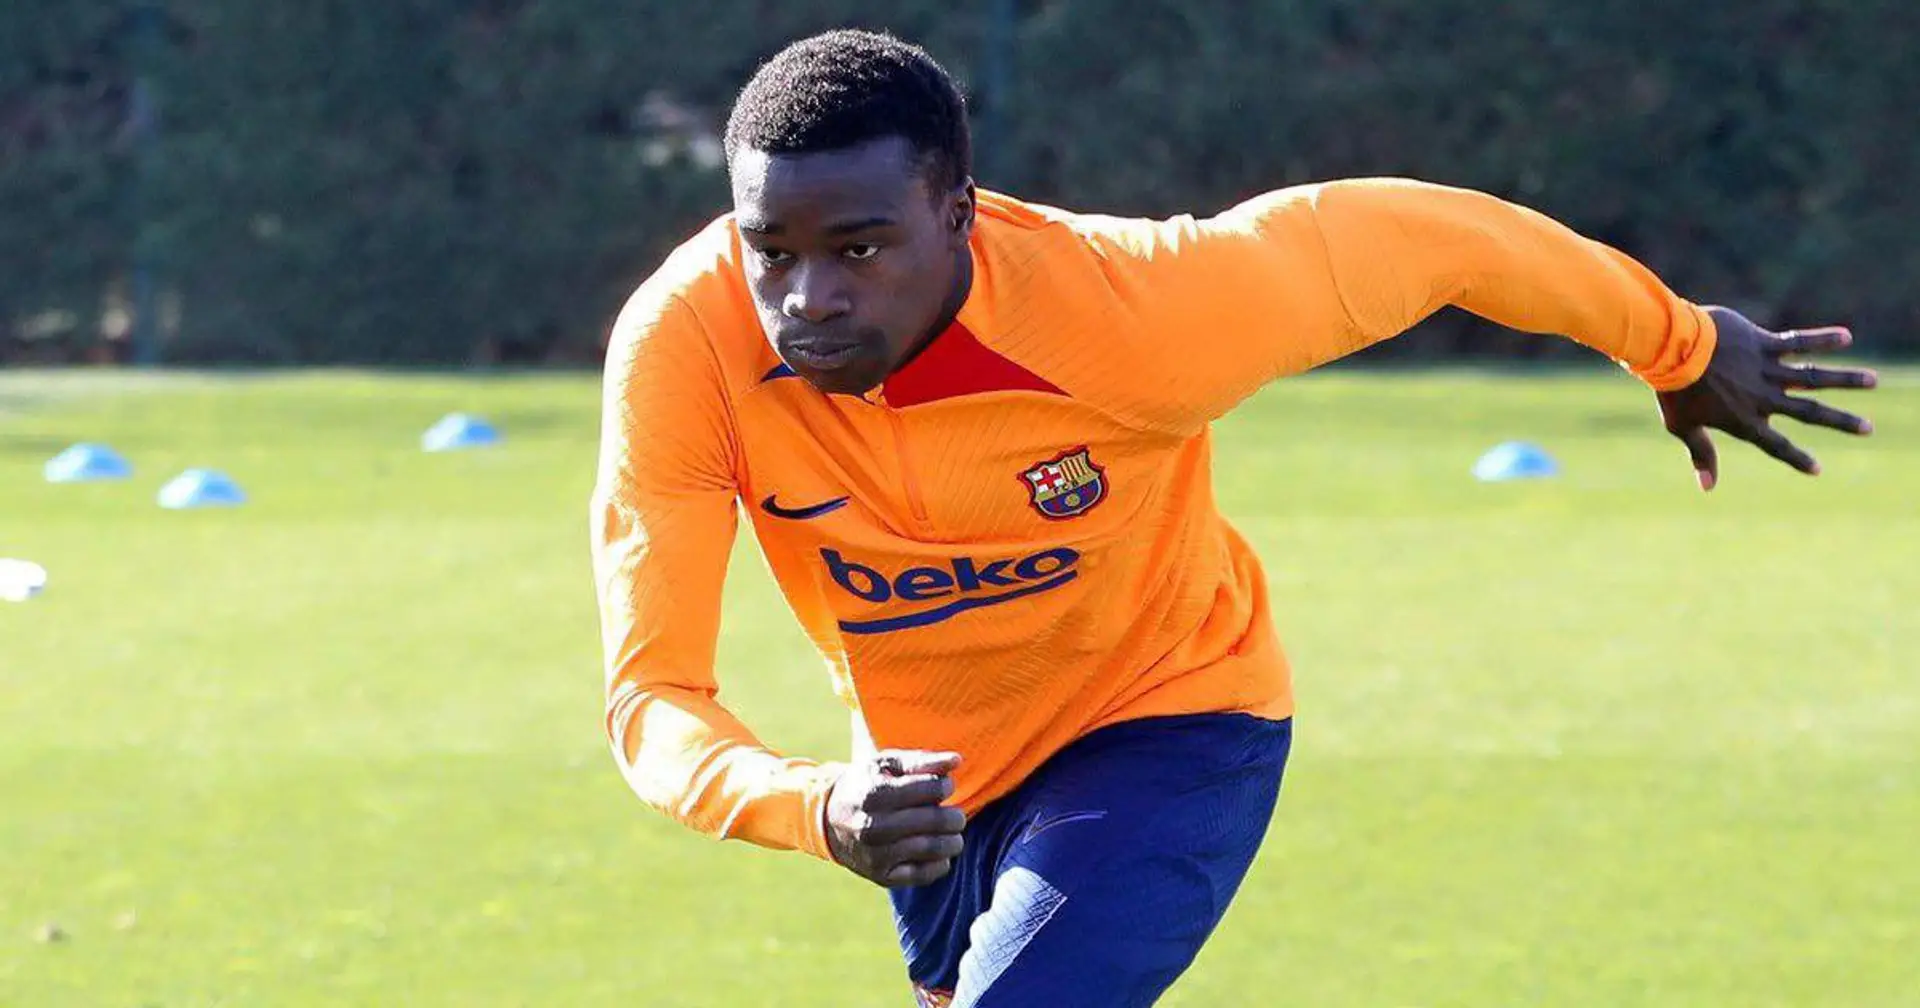 Moussa Wague returns to training after missing over a year through injury